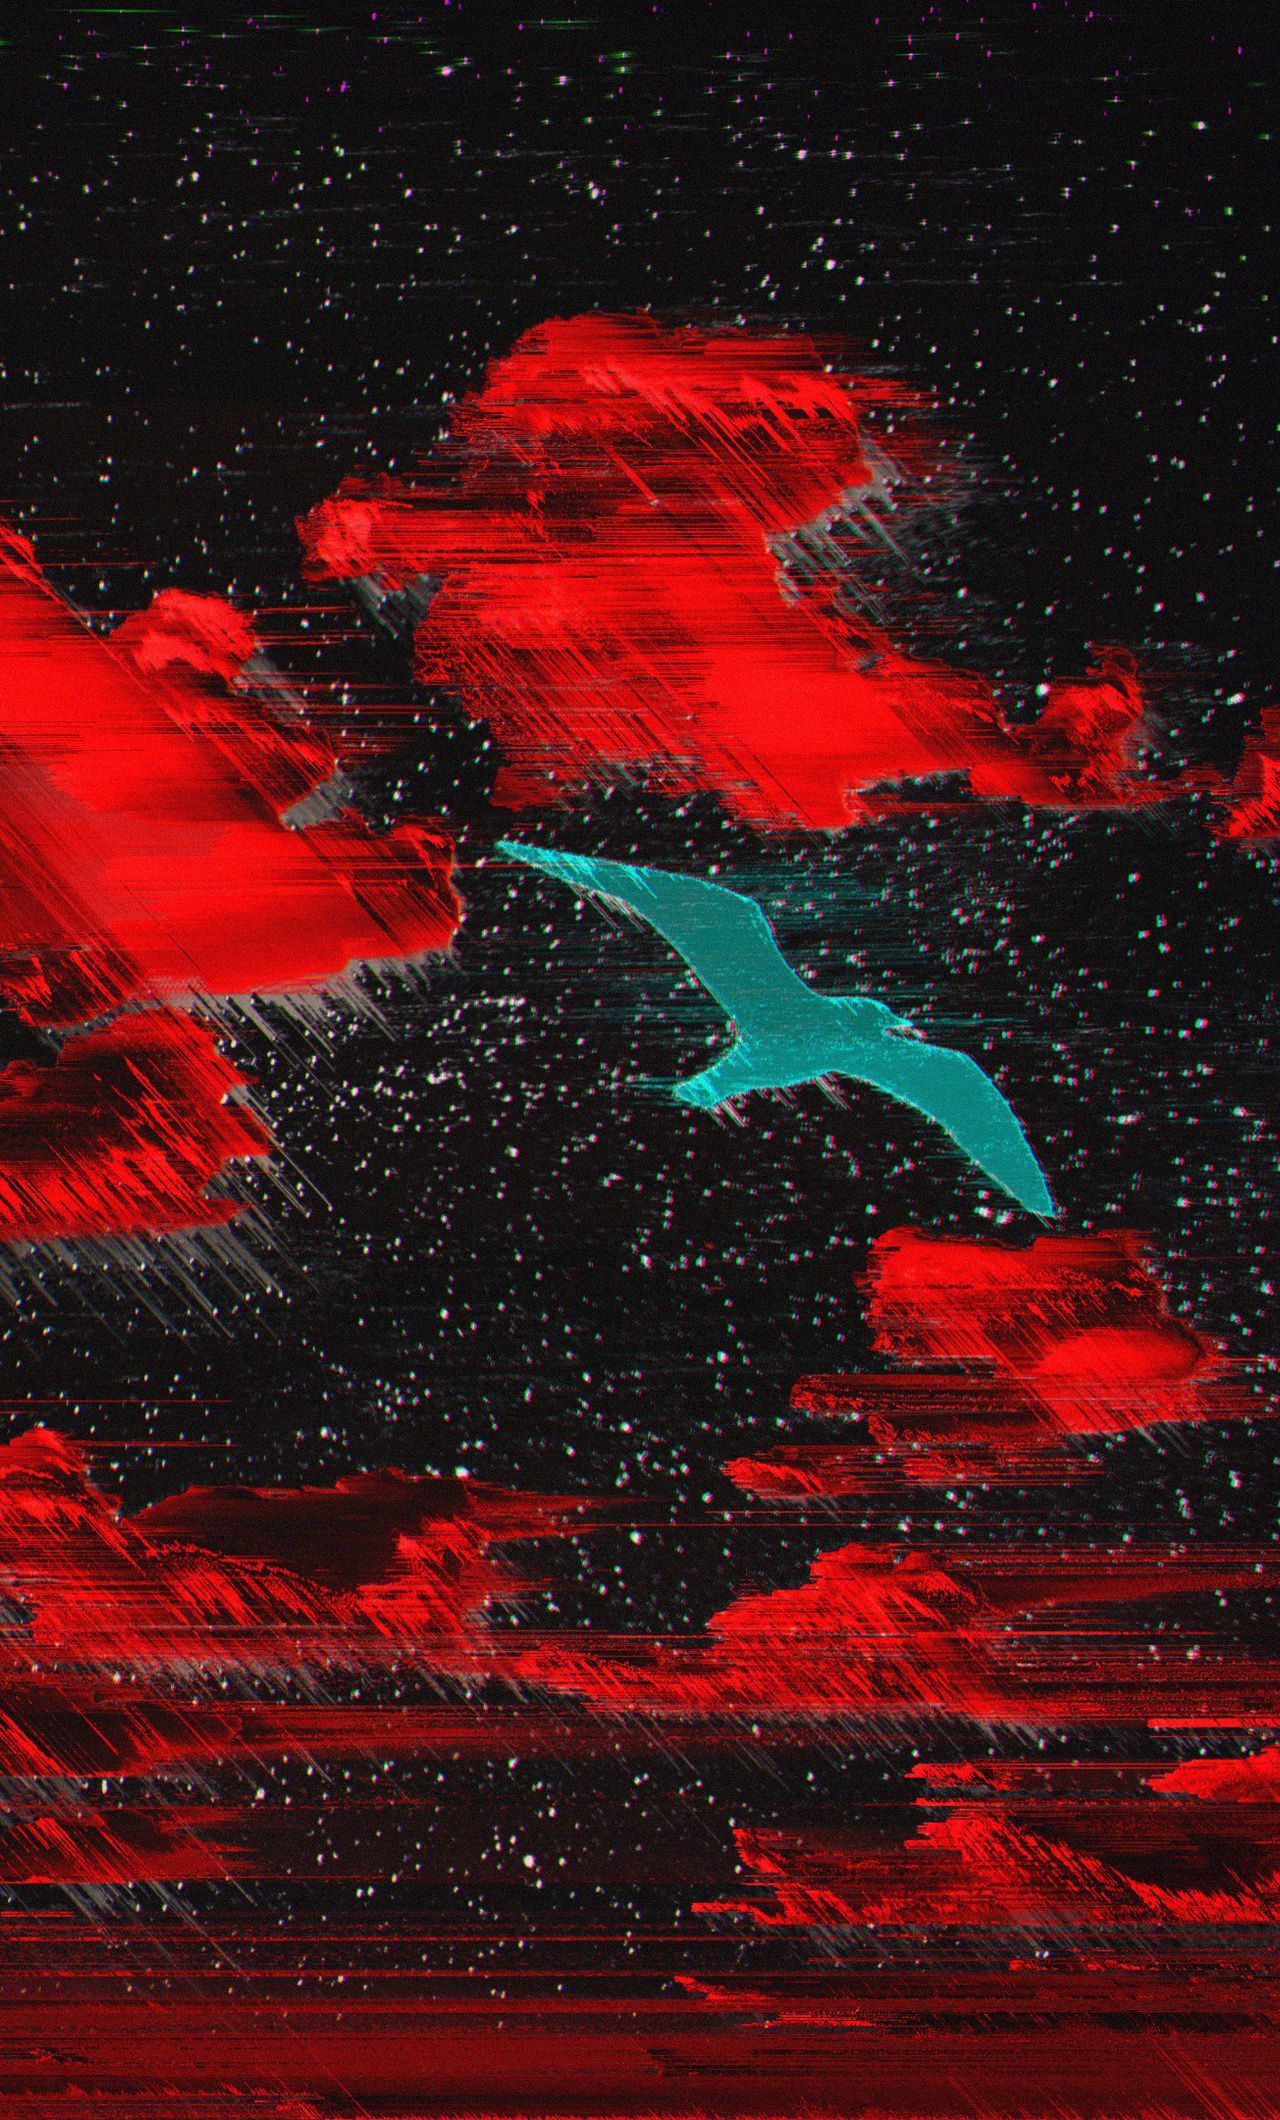 A seagull flying over red clouds - Glitch